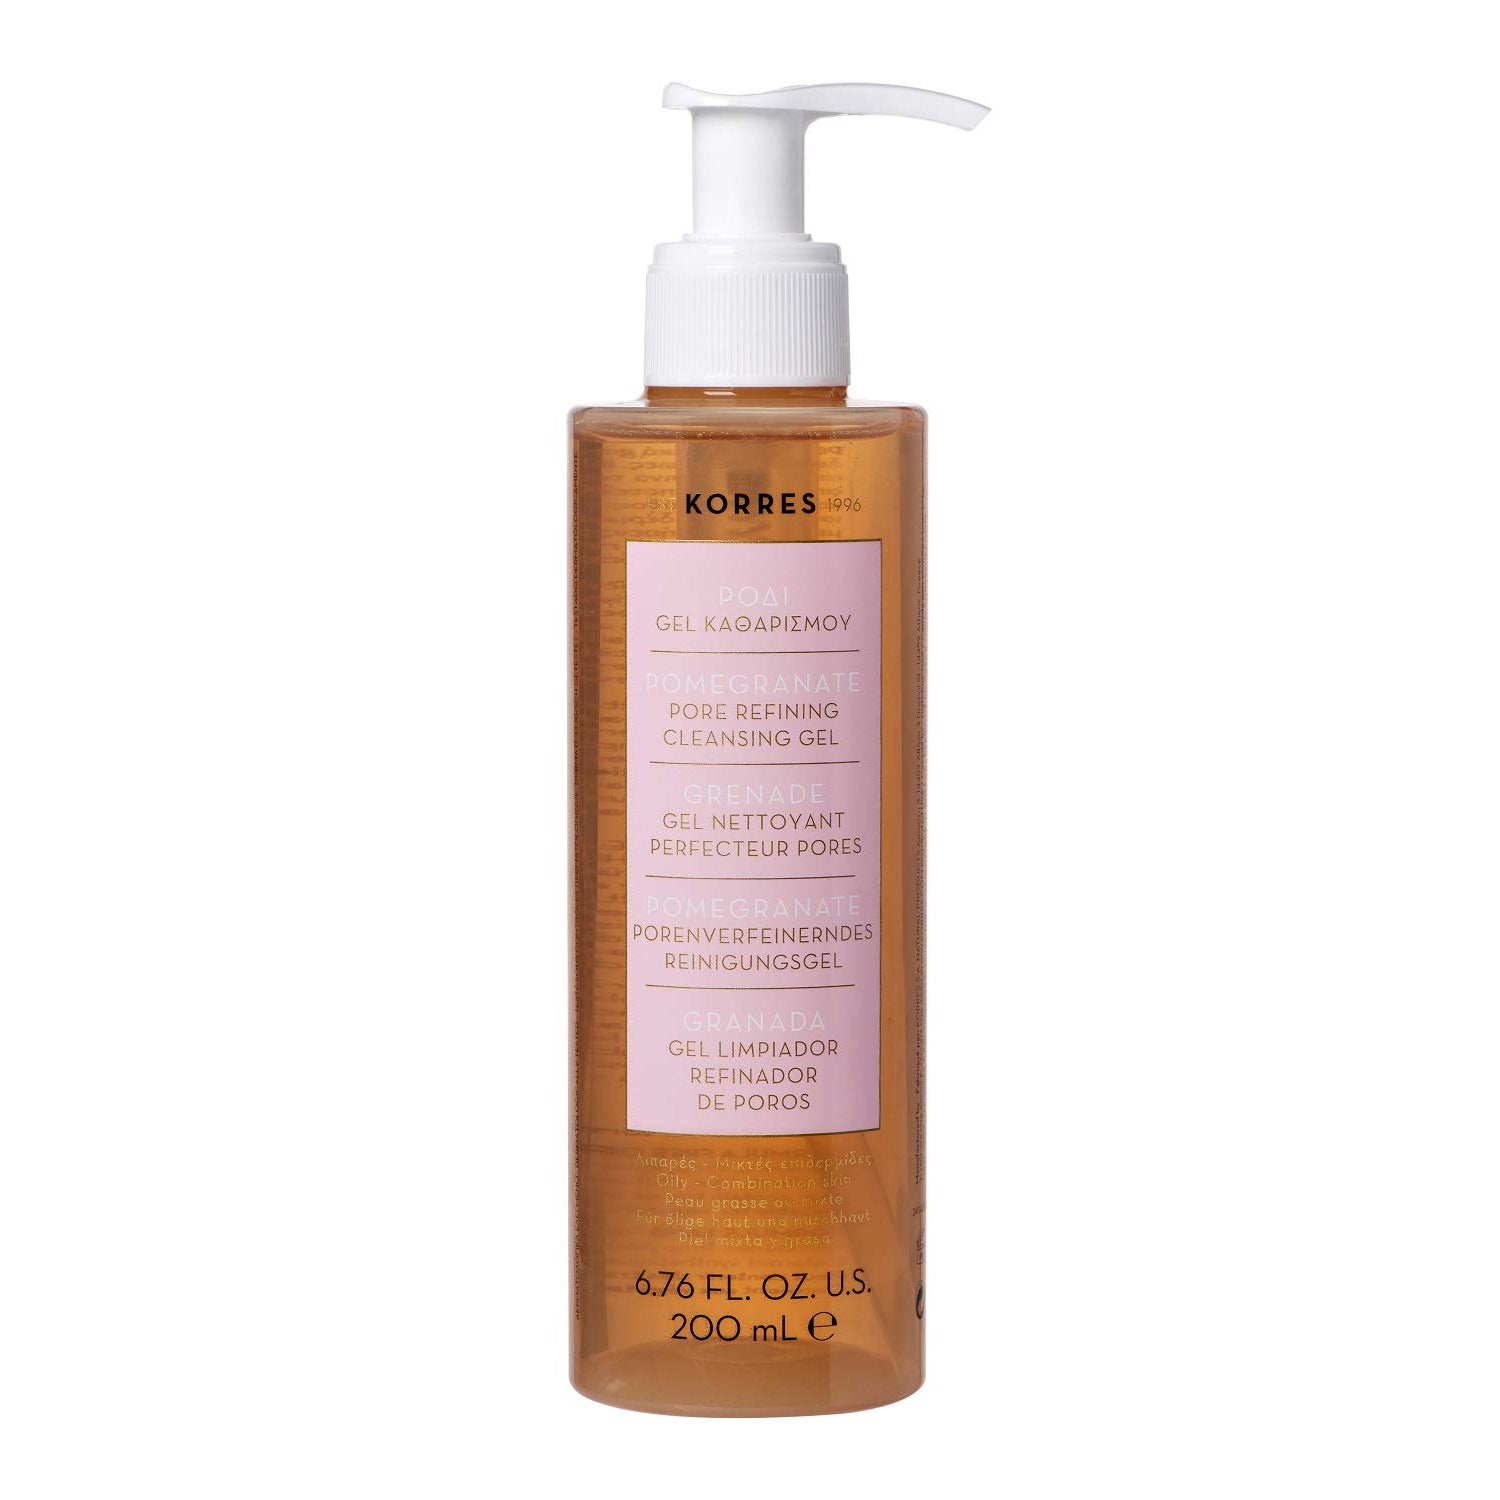 Korres Pomegranate Pore Refining Cleansing Gel - The Power Chic